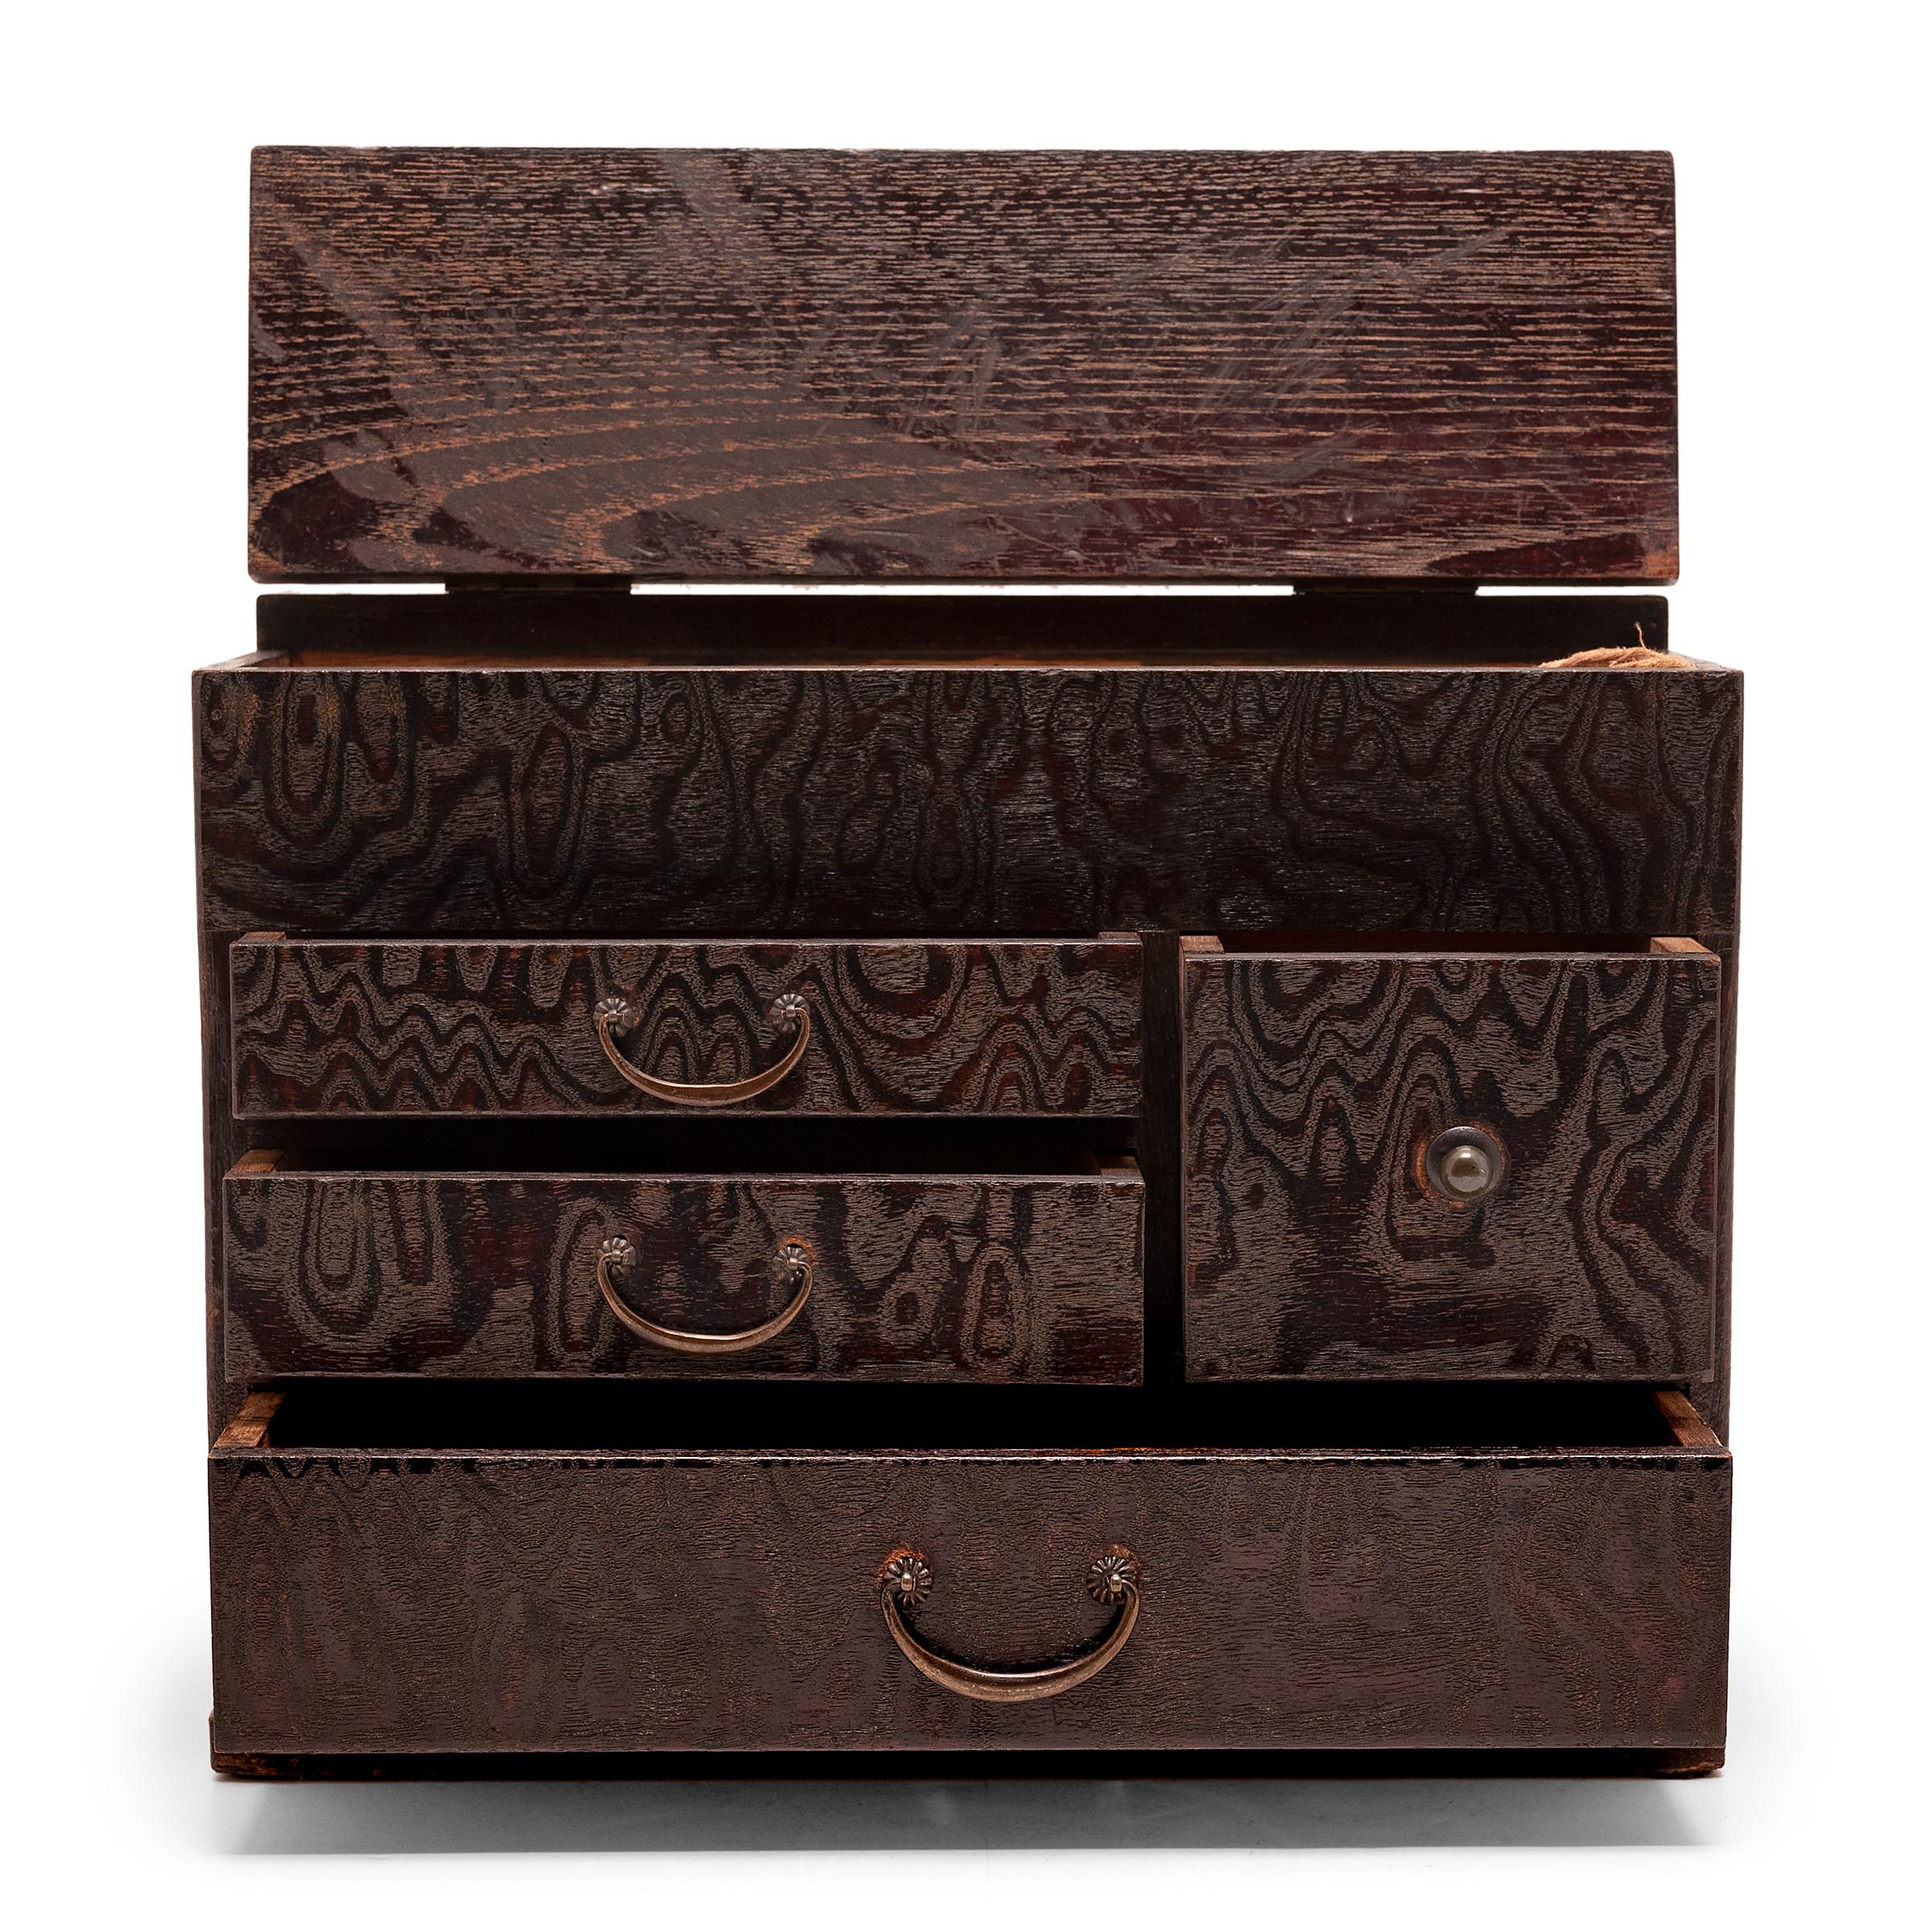 This elegant box with many drawers is a Japanese haribako, a tabletop chest used for storing sewing supplies, jewelry, or other accessories. The small chest features four drawers and a lid that lifts to reveal a shallow compartment and a removable